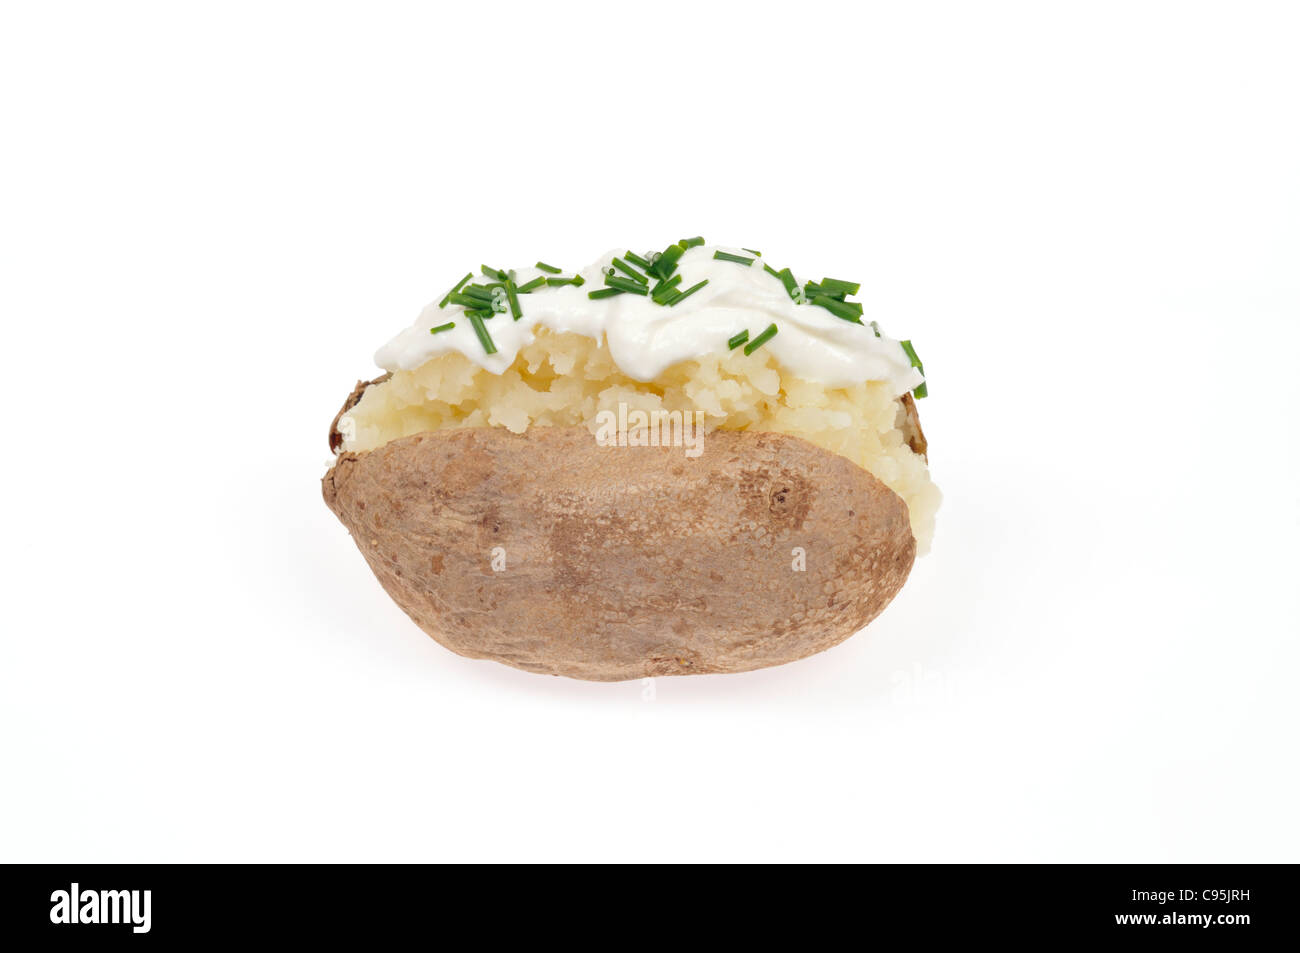 Baked potato topped with sour cream and chives on white background cutout. Stock Photo